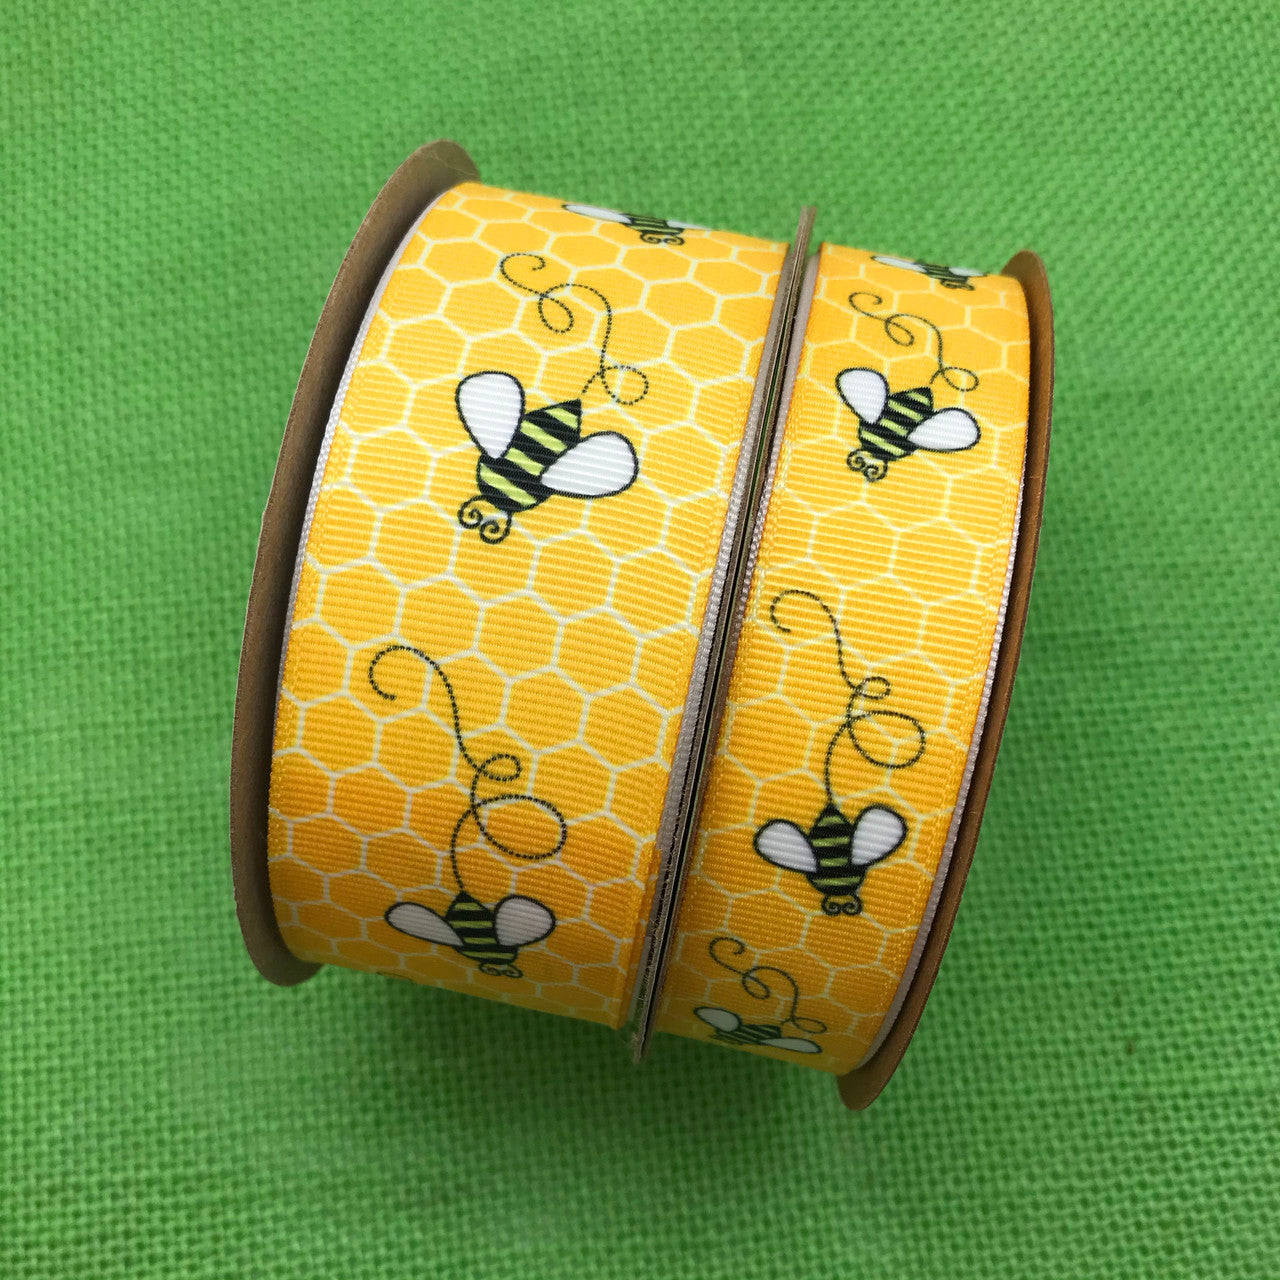 Buzzing bees in black and white printed on a yellow honeycomb background on  1.5 white grosgrain ribbon, 10 Yarsd